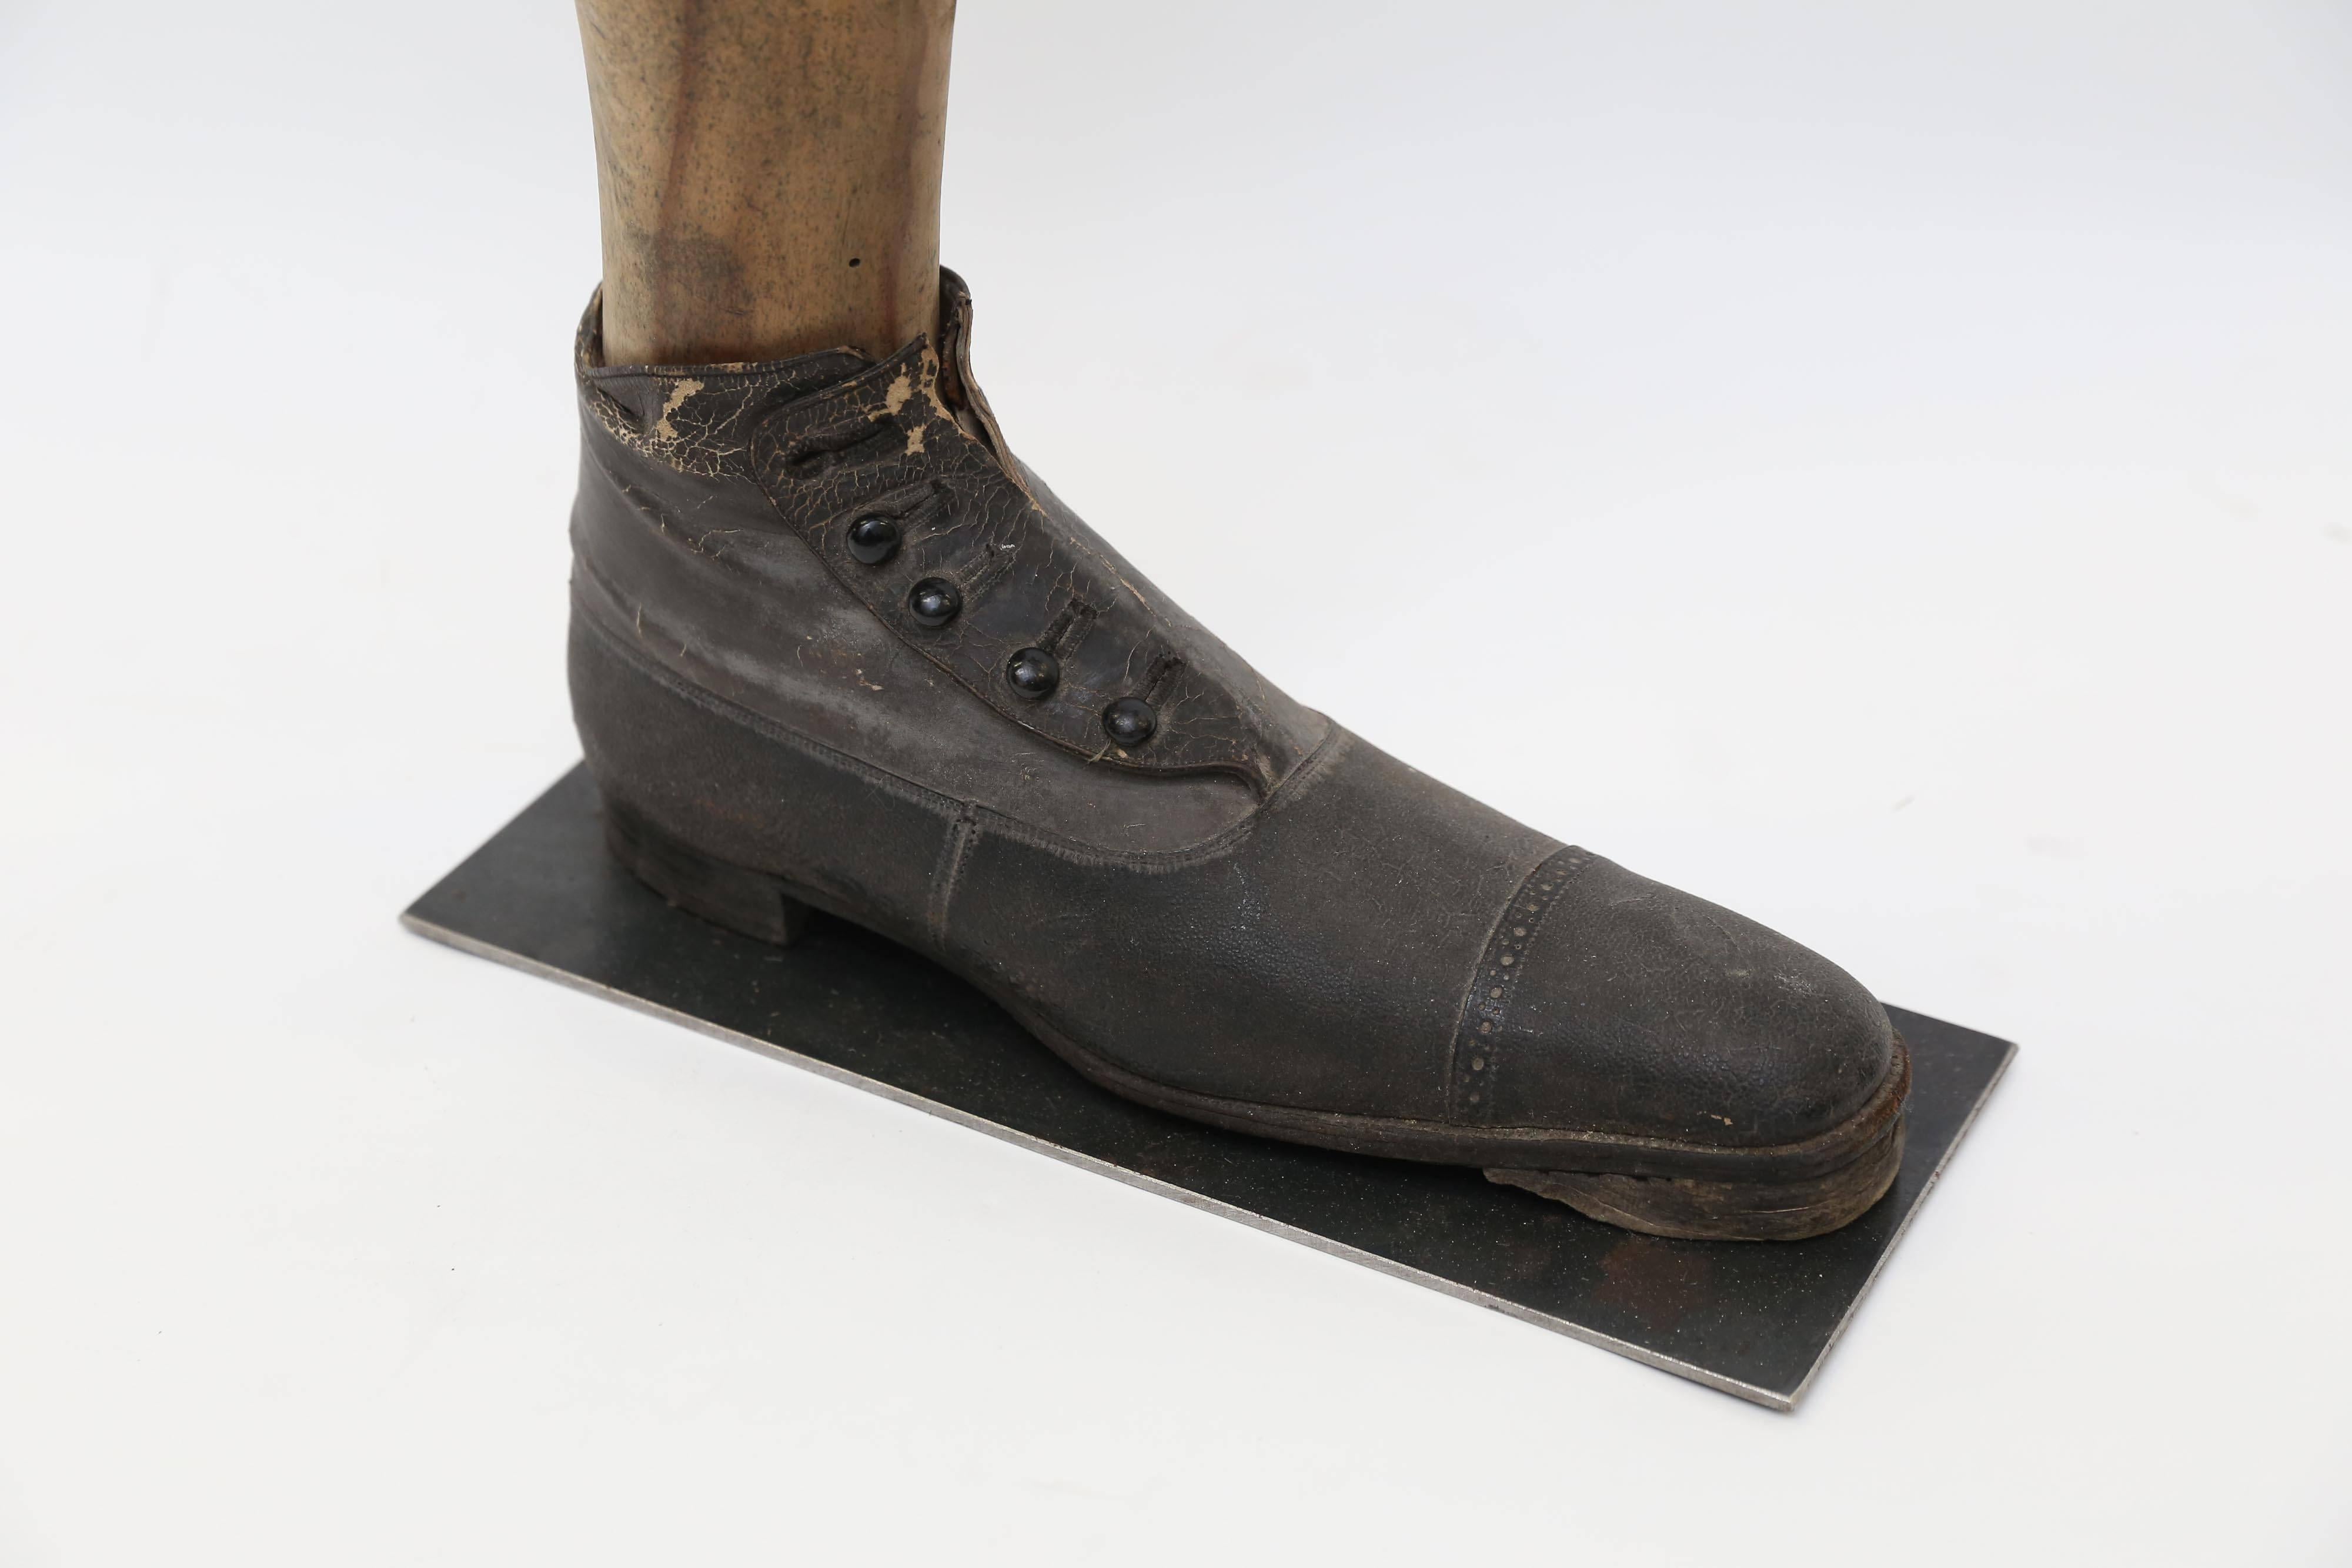 The leg of a wooden mannequin with a man's button-up shoe from the Victorian Era mounted on a metal base. The five button shoe is of finely stitched black leather with a hard leather sole. One of the buttons is missing. Mounted on a custom steel